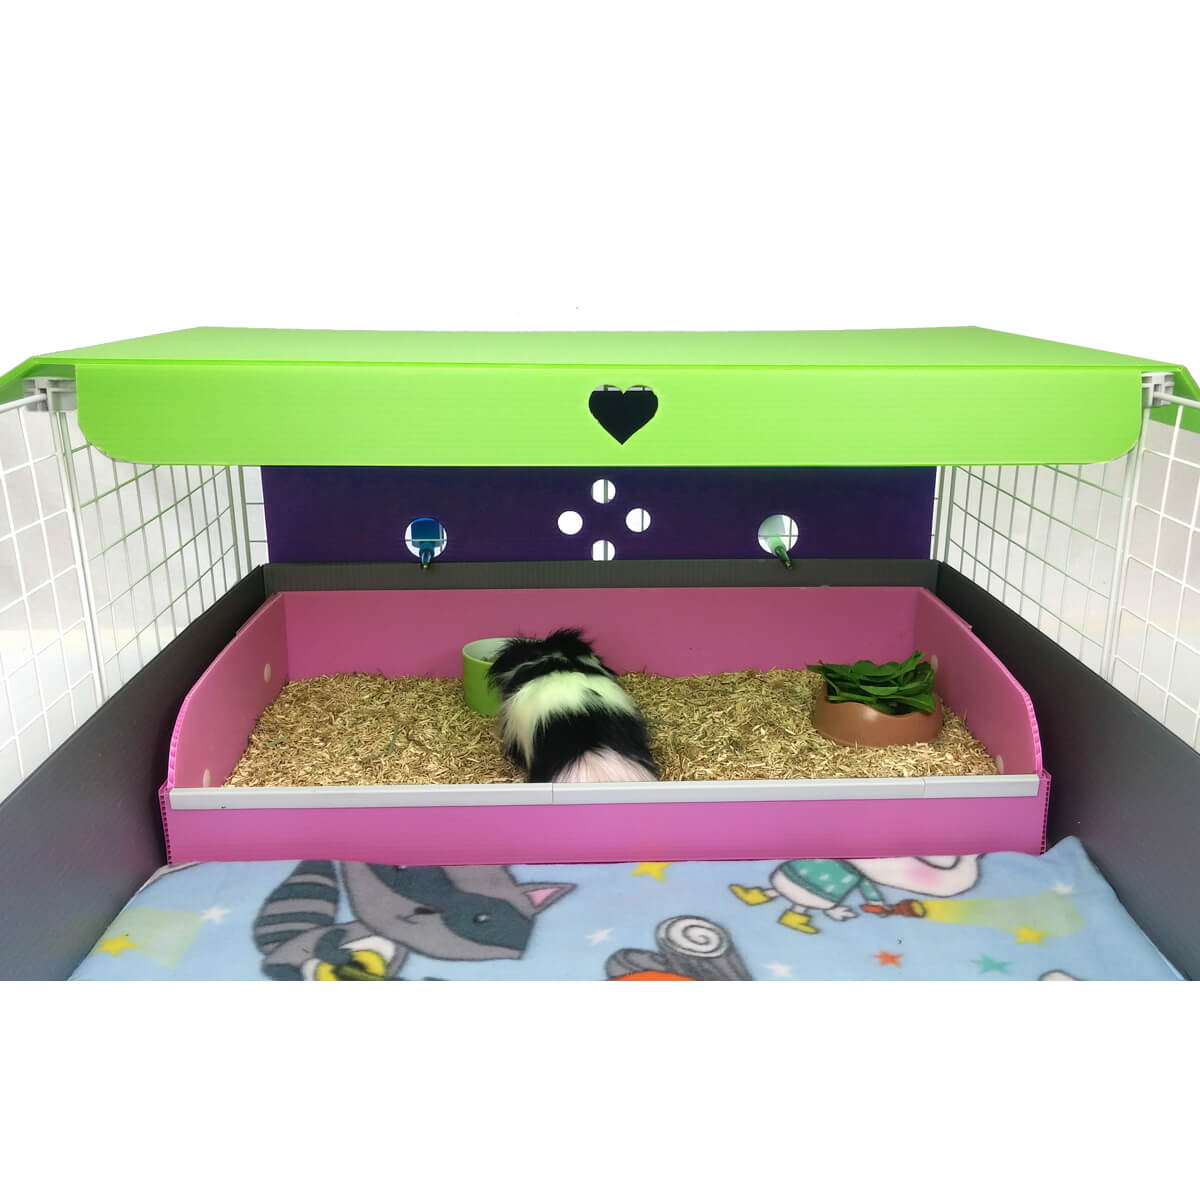 Guinea pig in a colorful Kitchen suite in a Silver C&C guinea pig cage